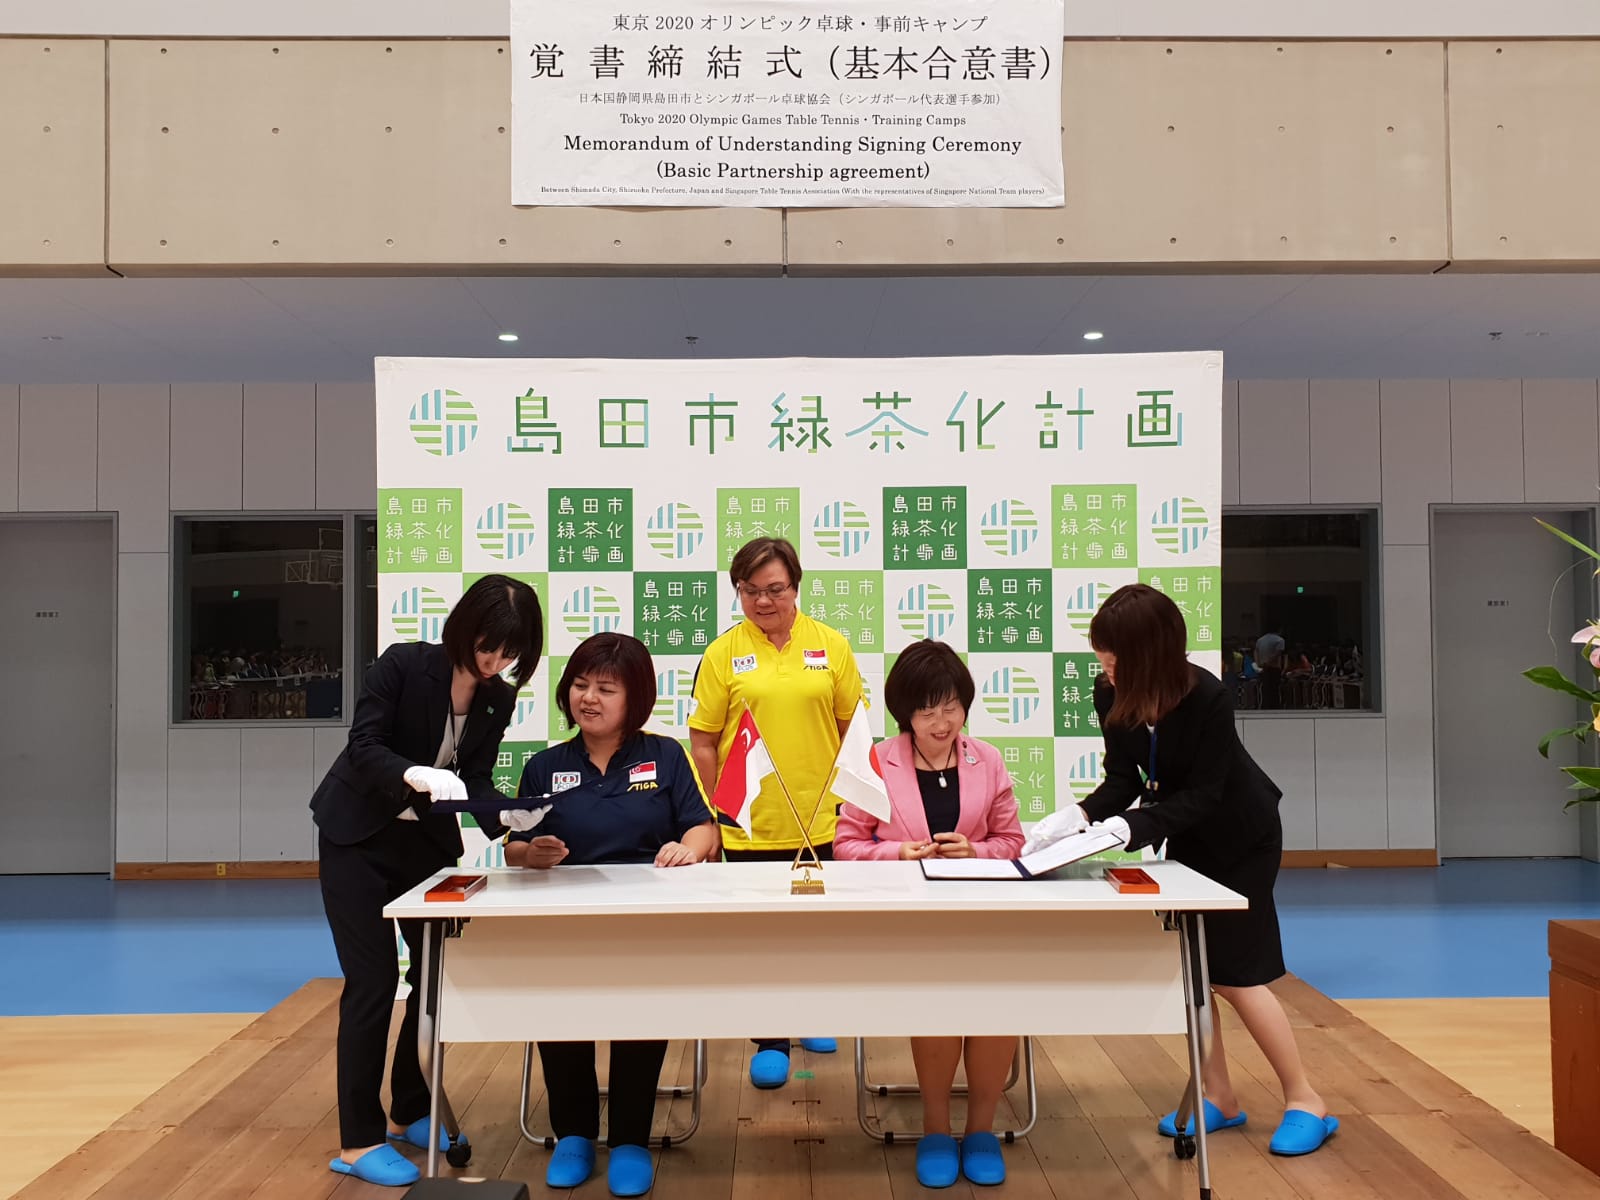 Table Tennis: Sports Exchange leading up to the 2020 Tokyo Olympics